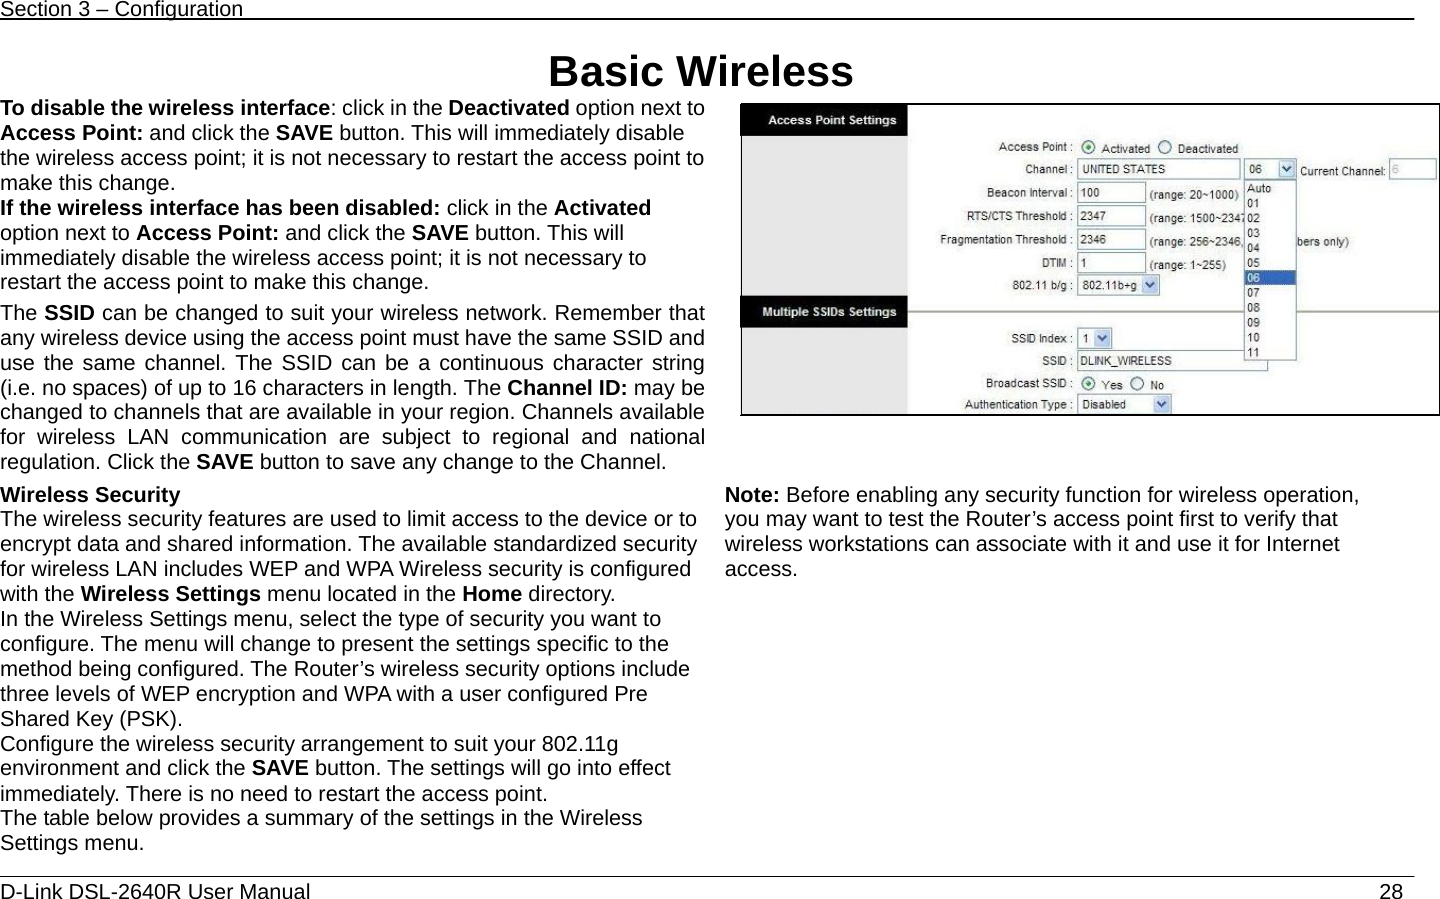 Section 3 – Configuration   D-Link DSL-2640R User Manual                           28Basic Wireless To disable the wireless interface: click in the Deactivated option next to Access Point: and click the SAVE button. This will immediately disable the wireless access point; it is not necessary to restart the access point to make this change.   If the wireless interface has been disabled: click in the Activated option next to Access Point: and click the SAVE button. This will immediately disable the wireless access point; it is not necessary to restart the access point to make this change. The SSID can be changed to suit your wireless network. Remember that any wireless device using the access point must have the same SSID and use the same channel. The SSID can be a continuous character string (i.e. no spaces) of up to 16 characters in length. The Channel ID: may be changed to channels that are available in your region. Channels available for wireless LAN communication are subject to regional and national regulation. Click the SAVE button to save any change to the Channel.  Wireless Security The wireless security features are used to limit access to the device or to encrypt data and shared information. The available standardized security for wireless LAN includes WEP and WPA Wireless security is configured with the Wireless Settings menu located in the Home directory. In the Wireless Settings menu, select the type of security you want to configure. The menu will change to present the settings specific to the method being configured. The Router’s wireless security options include three levels of WEP encryption and WPA with a user configured Pre Shared Key (PSK). Configure the wireless security arrangement to suit your 802.11g environment and click the SAVE button. The settings will go into effect immediately. There is no need to restart the access point. The table below provides a summary of the settings in the Wireless Settings menu. Note: Before enabling any security function for wireless operation, you may want to test the Router’s access point first to verify that wireless workstations can associate with it and use it for Internet access.         